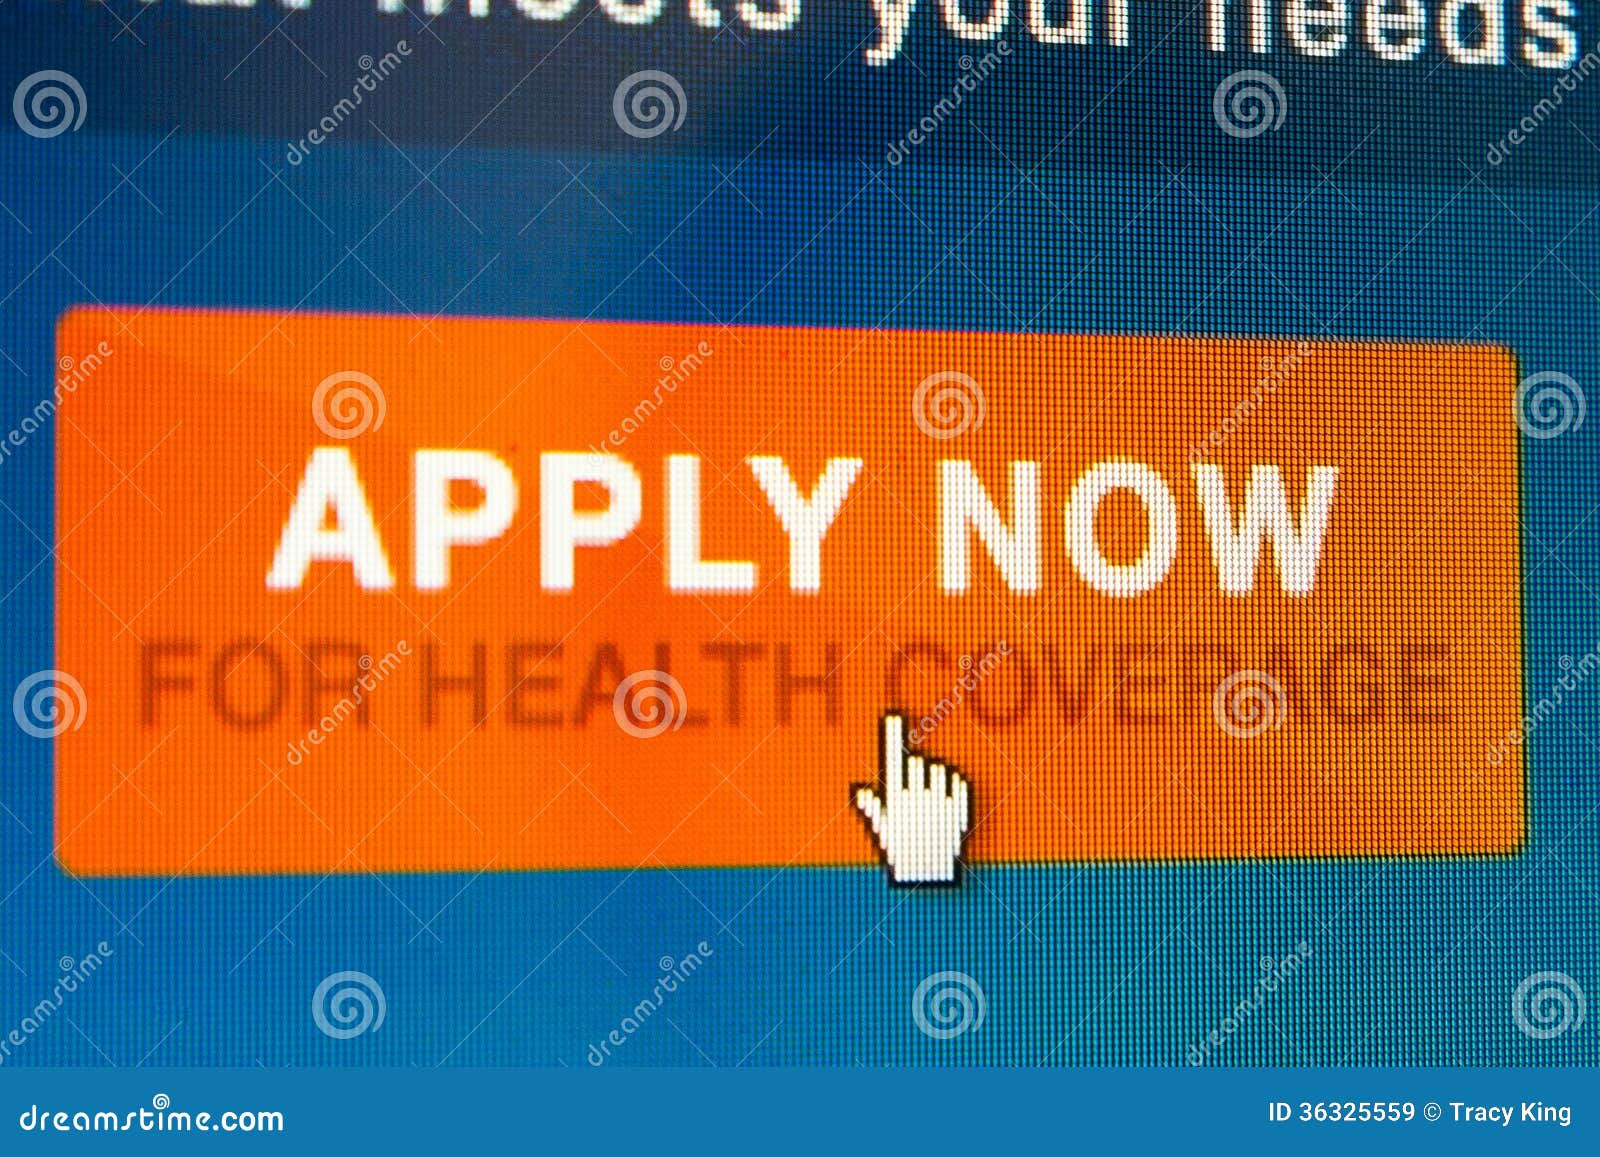 apply now for health coverage